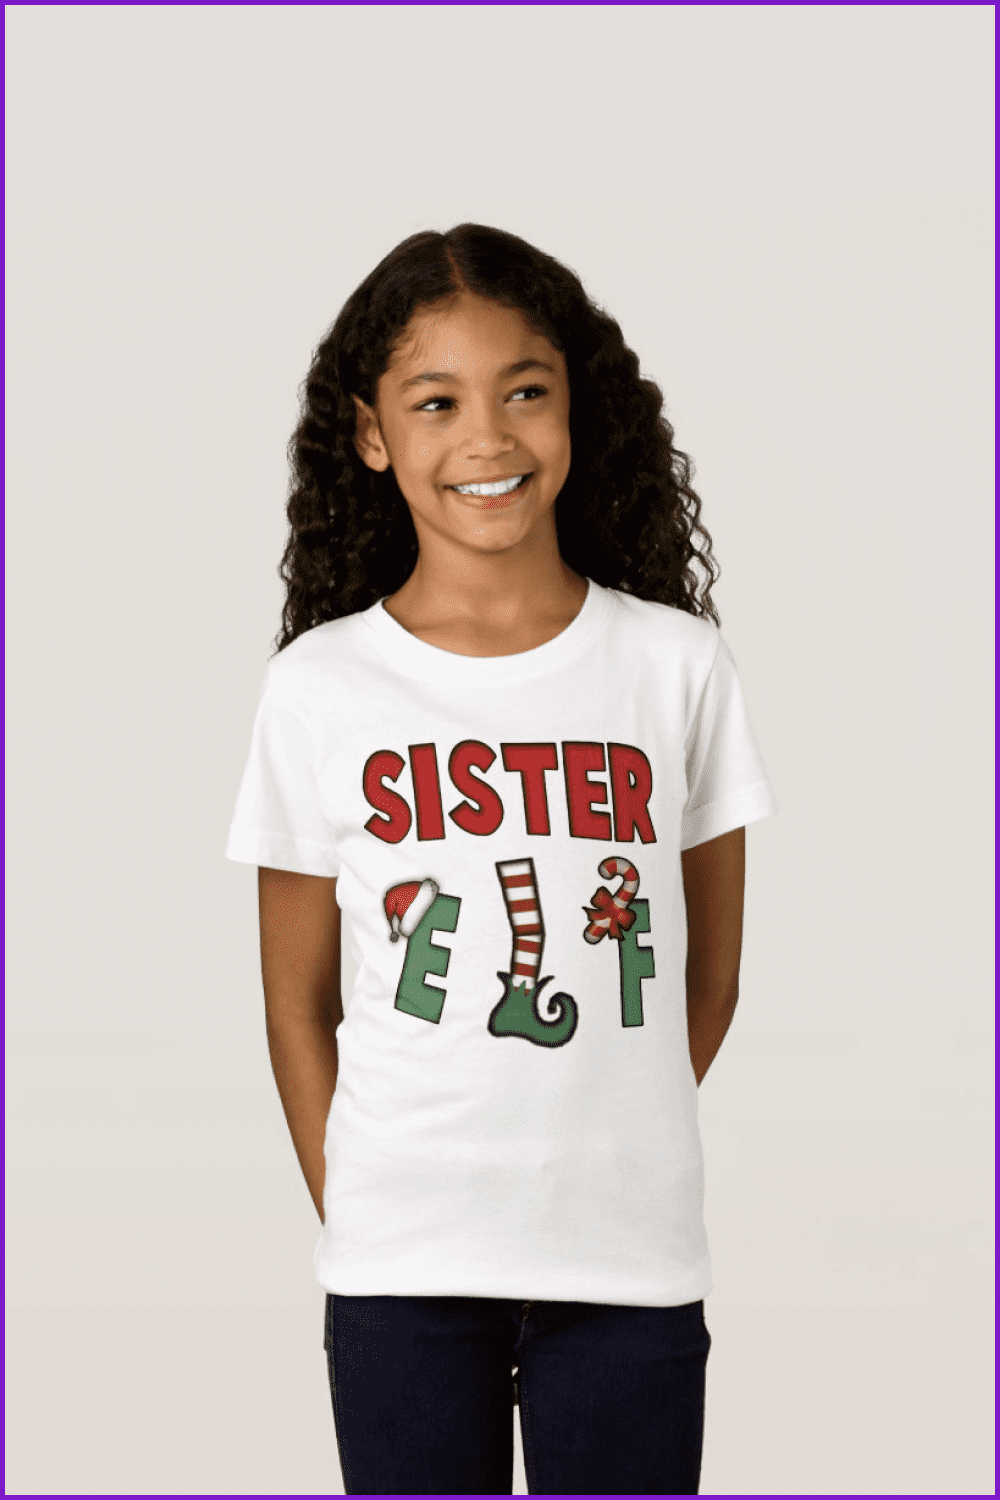 Girl in a white t-shirt with inscription Sister Elf.